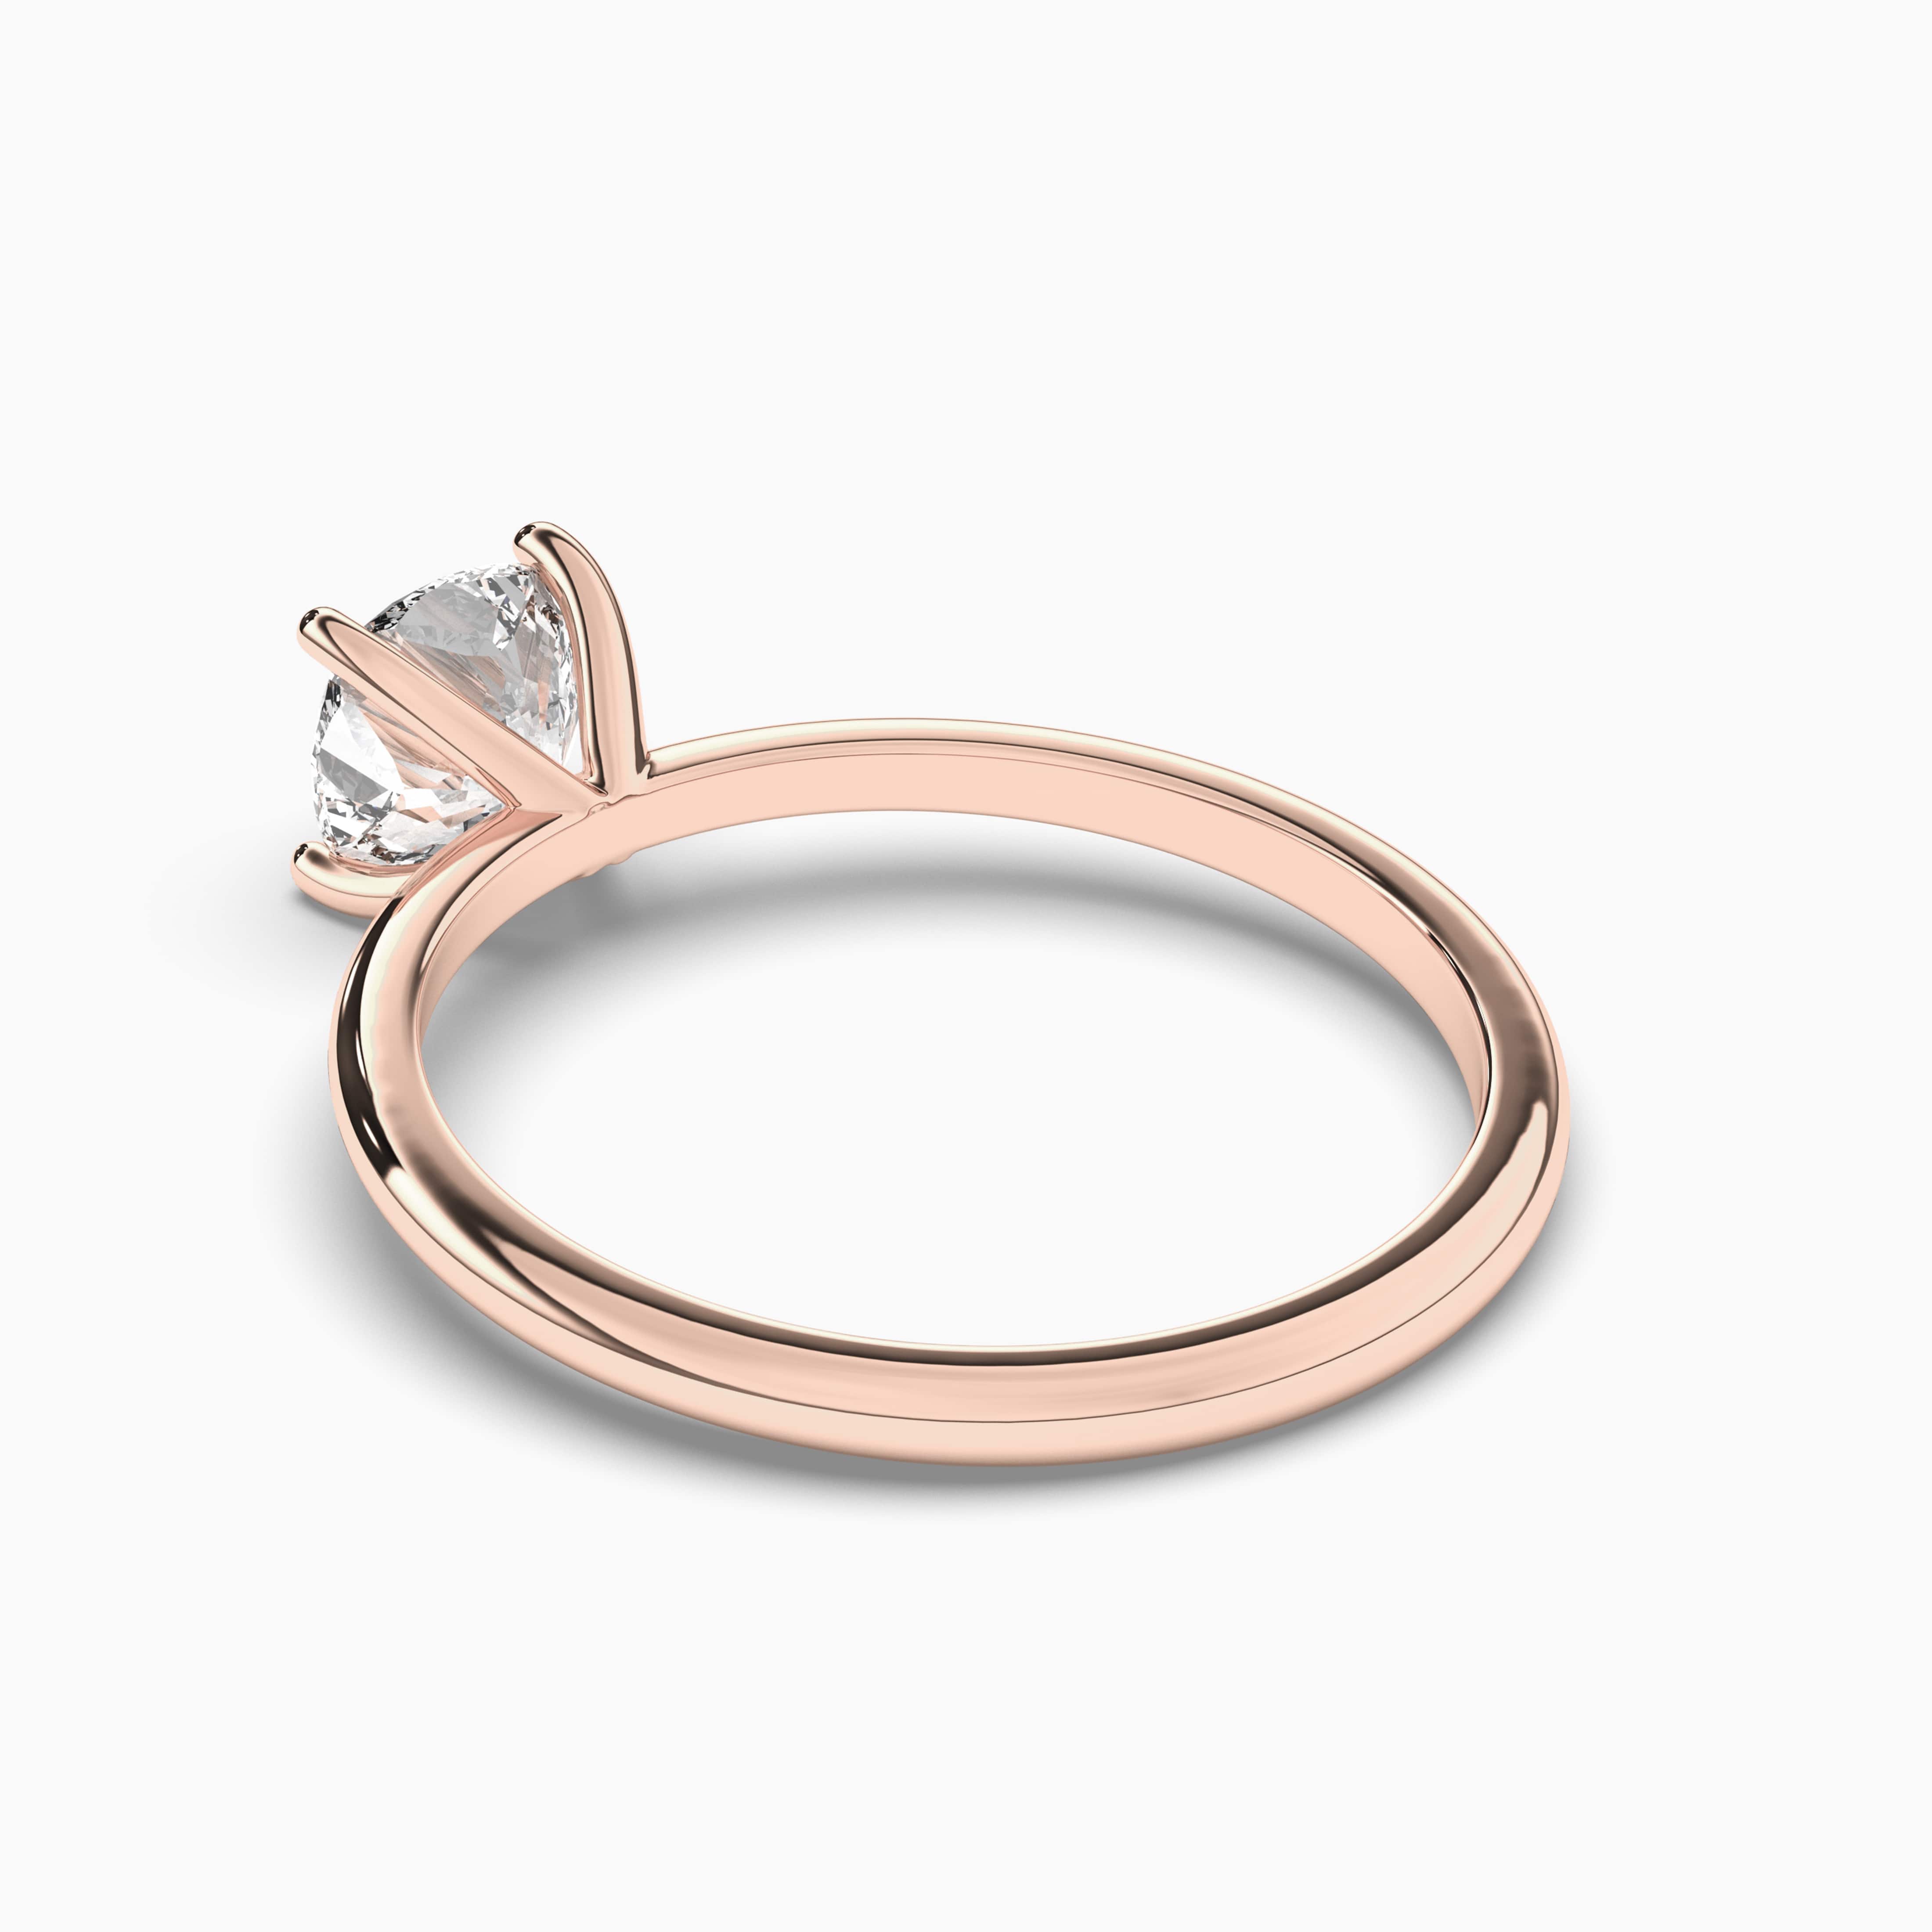 Cushion cut diamond solitaire ring on rose gold 